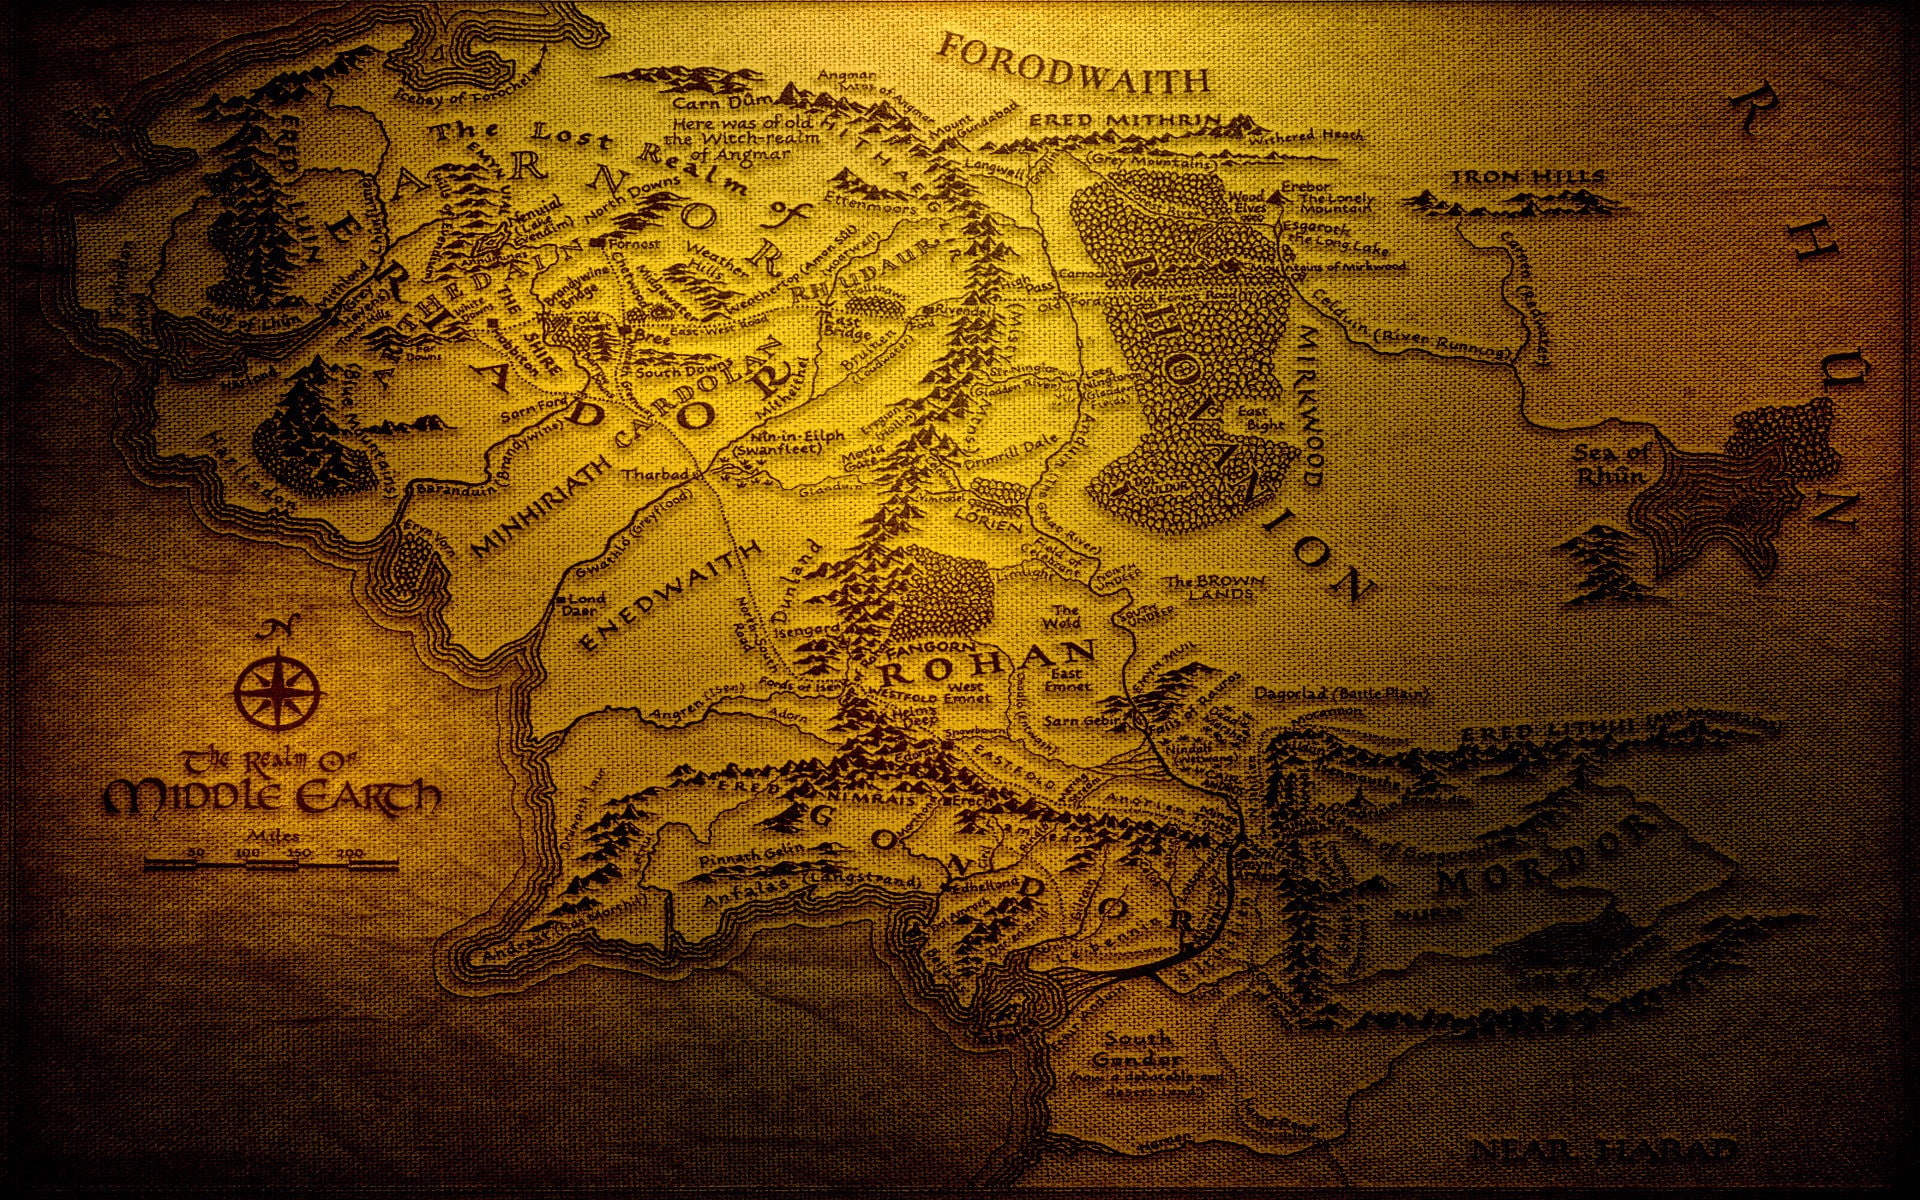 map, Middle-earth, The Lord of the Rings, J. R. R. Tolkien